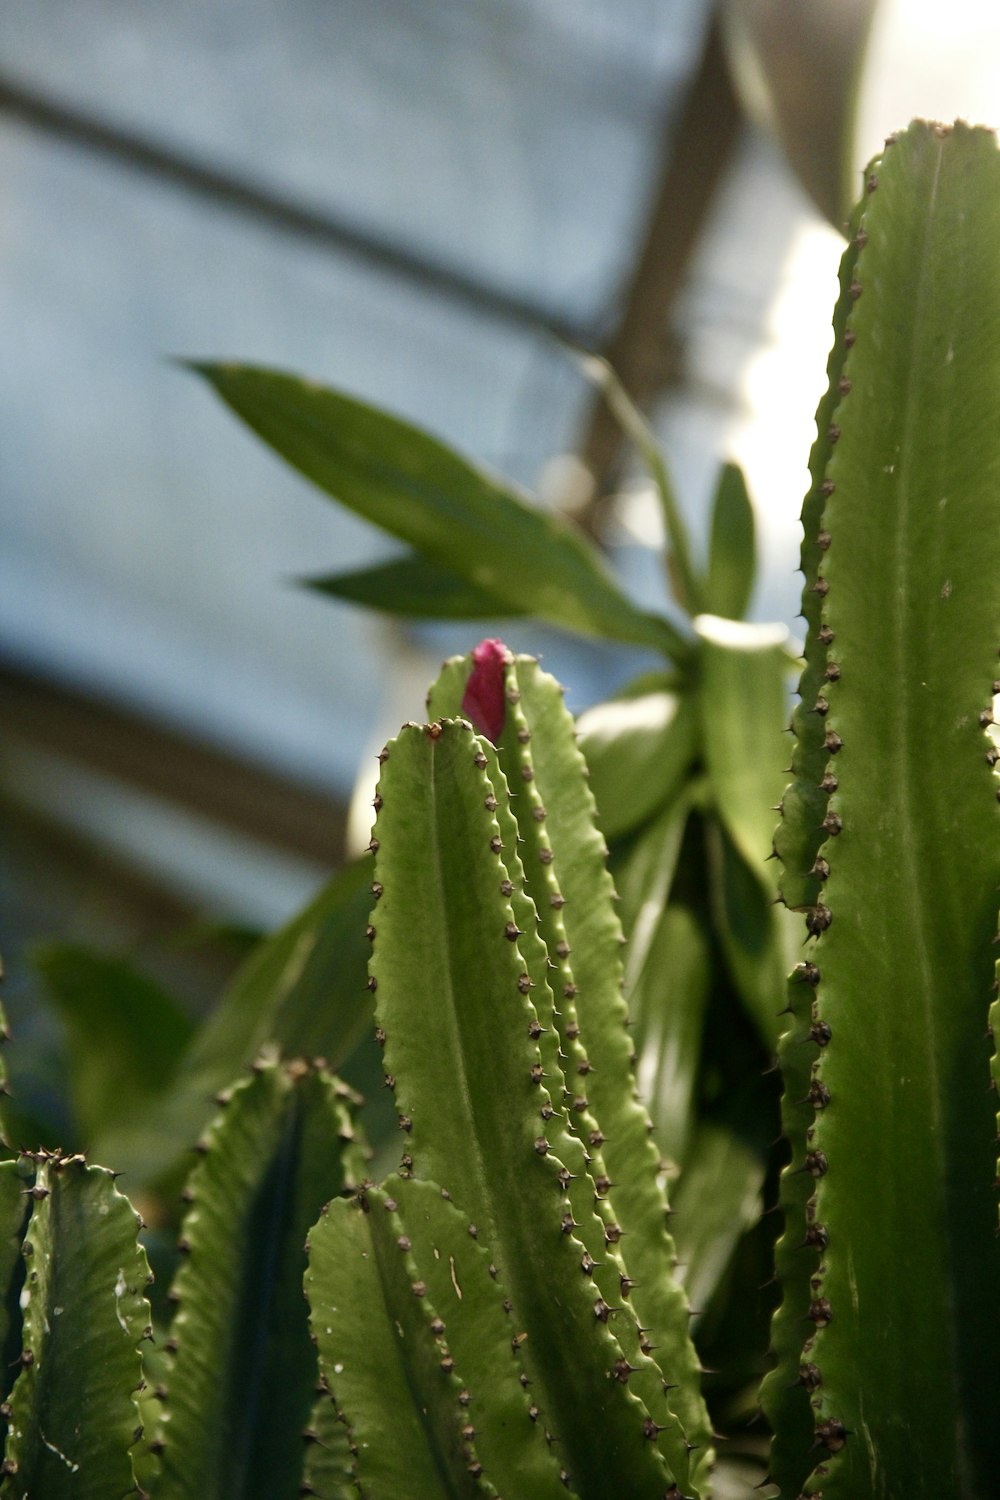 a close up of a green plant with a red flower